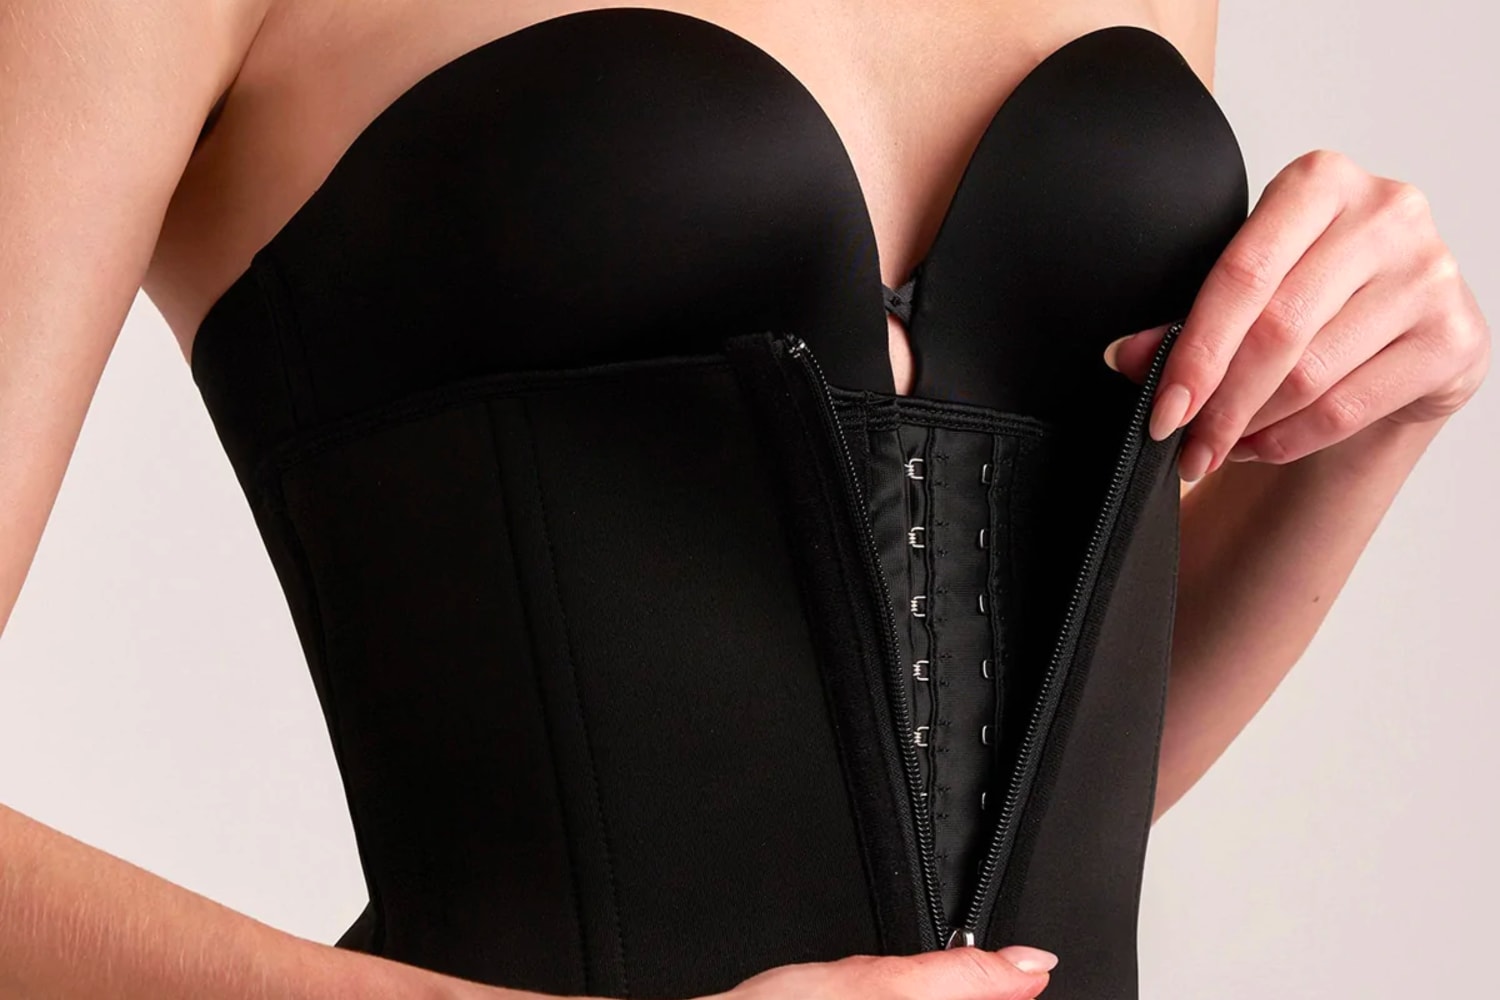 Unlock your wardrobe must-have with shapewear embraced by diverse